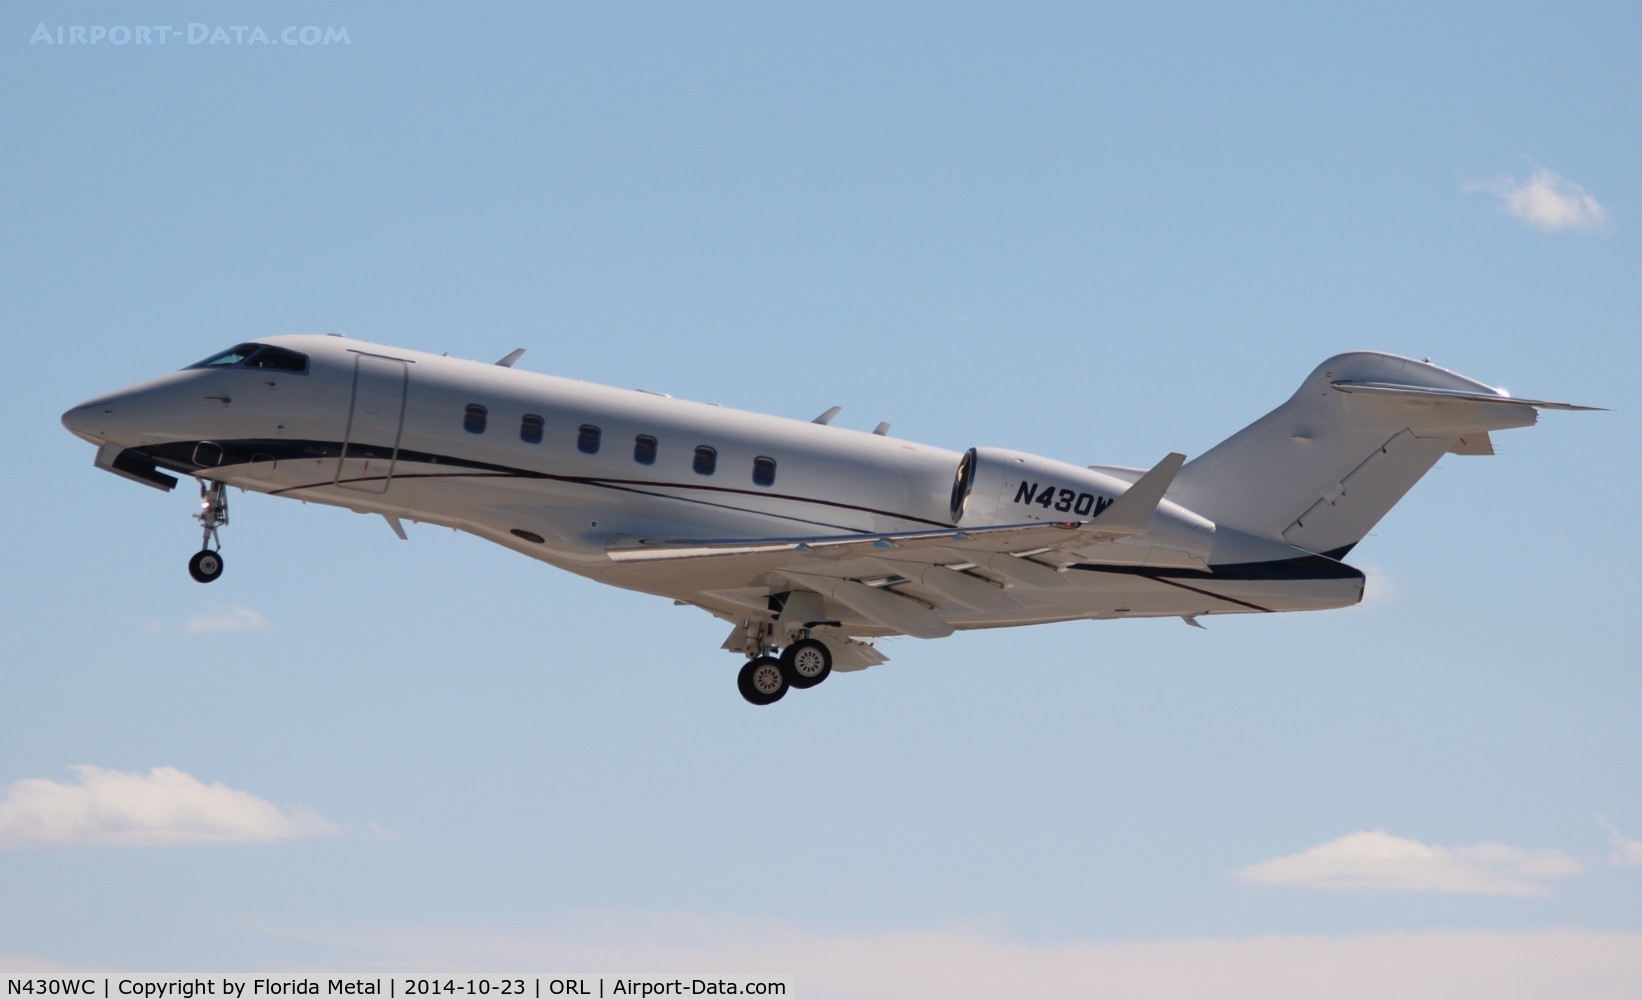 N430WC, 2010 Bombardier Challenger 300 (BD-100-1A10) C/N 20288, Challenger 300